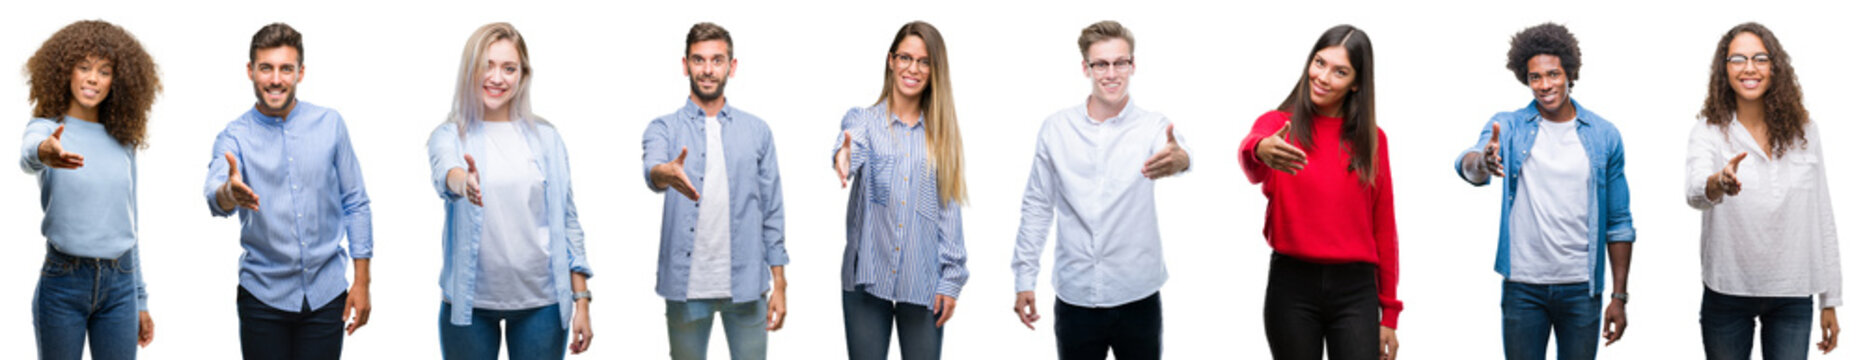 Composition Of African American, Hispanic And Caucasian Group Of People Over Isolated White Background Smiling Friendly Offering Handshake As Greeting And Welcoming. Successful Business.